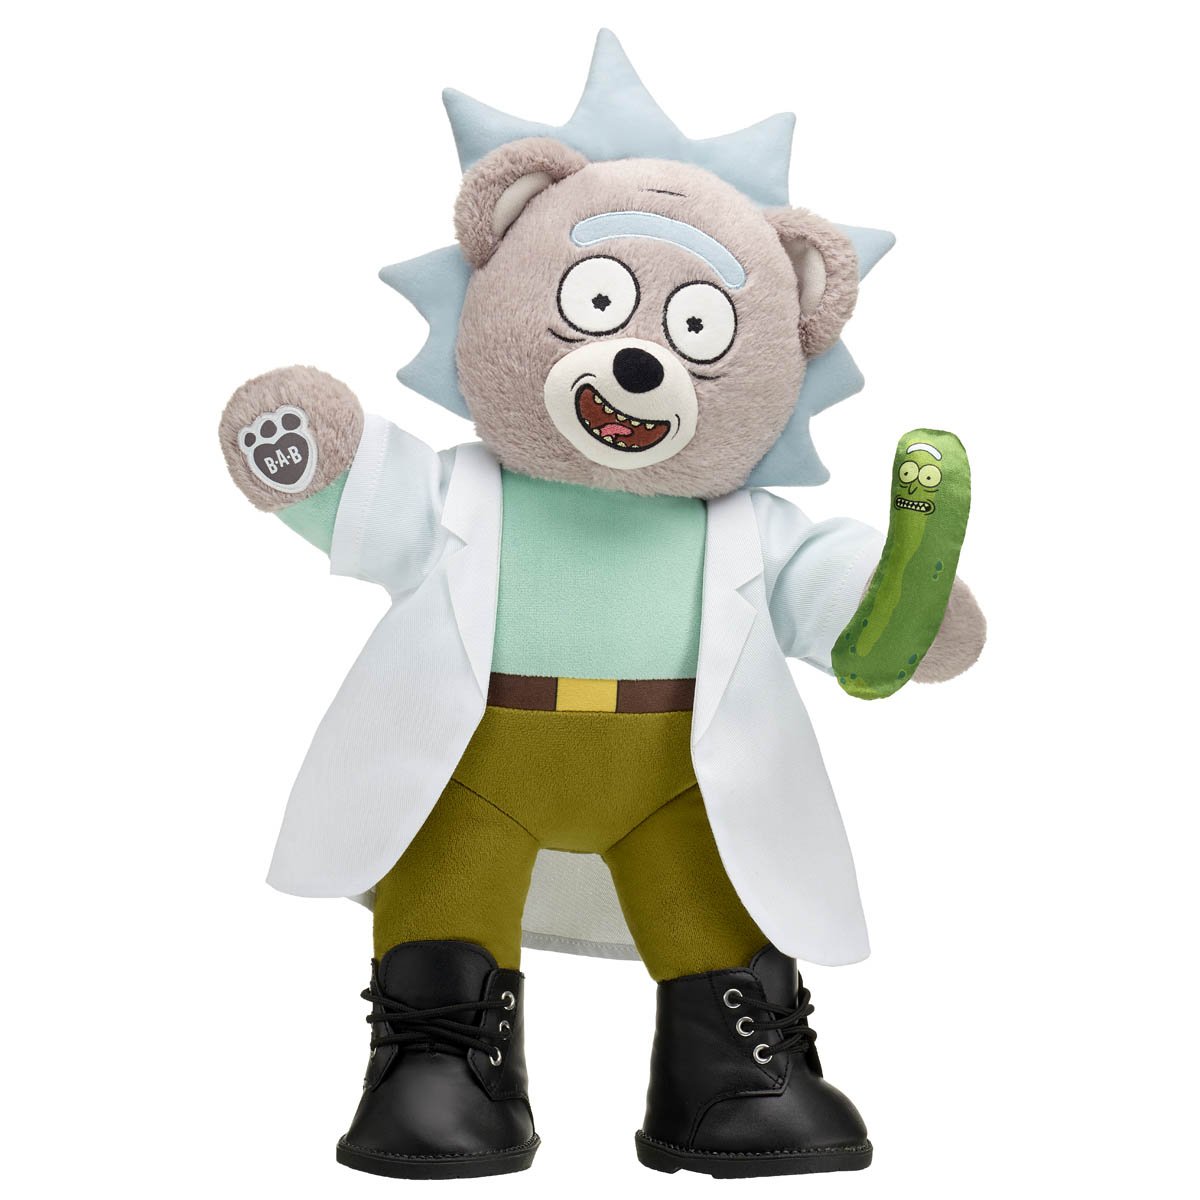 I have just learned that Build-A-Bear makes a Rick Sanchez that comes with optional Pickle Rick accessory